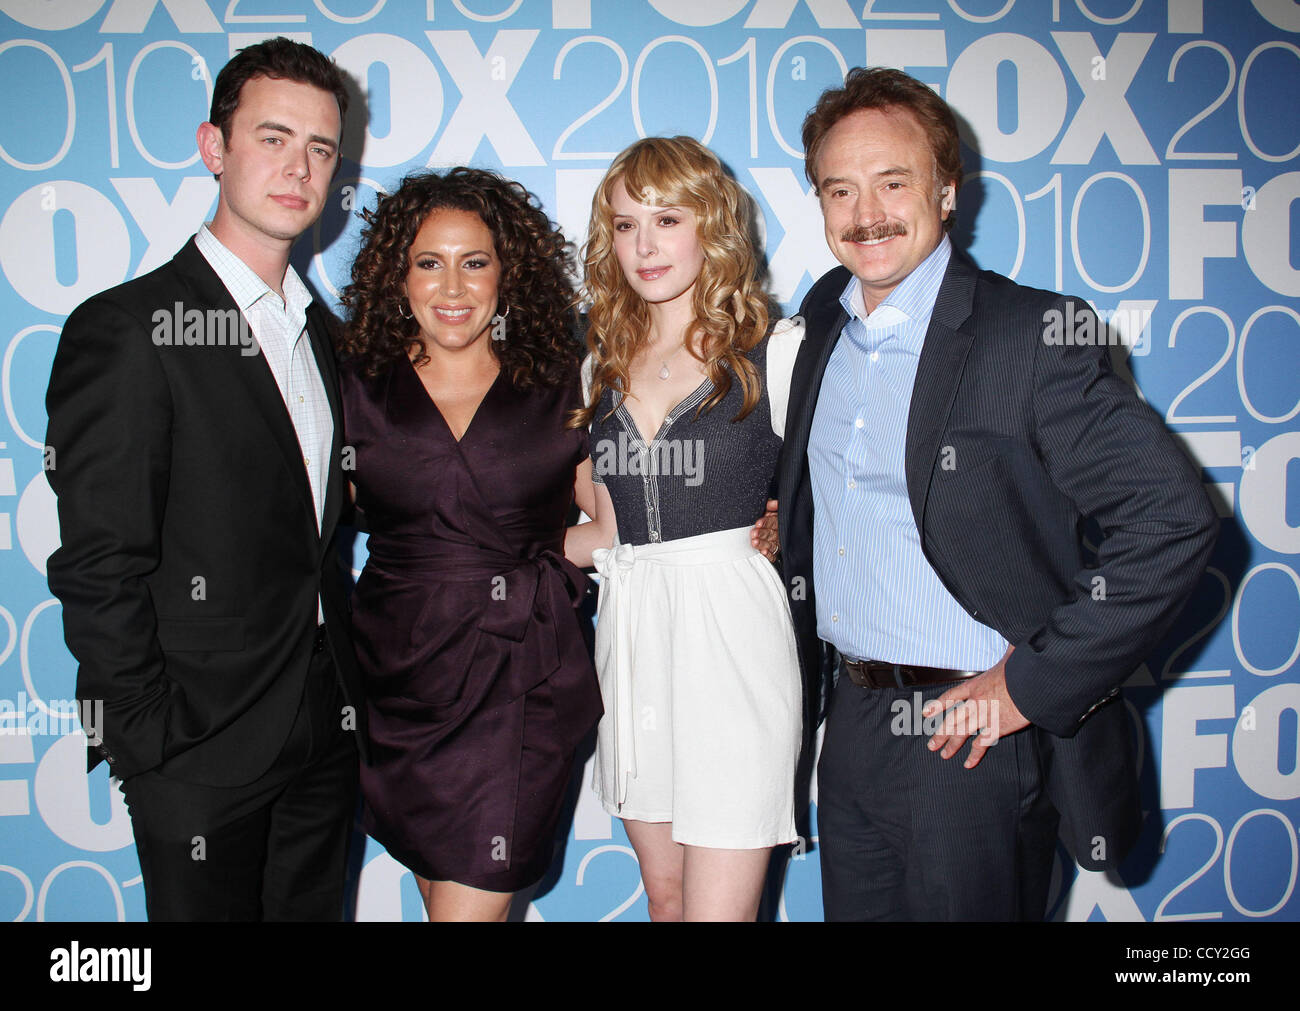 (L-R) Actors COLIN HANKS, DIANA MARIA RIVA, JENNY WADE, and BRADLEY WHITFORD attend the FOX 2010 Upfront after-party held at Wollman Rink in Central Park. Stock Photo